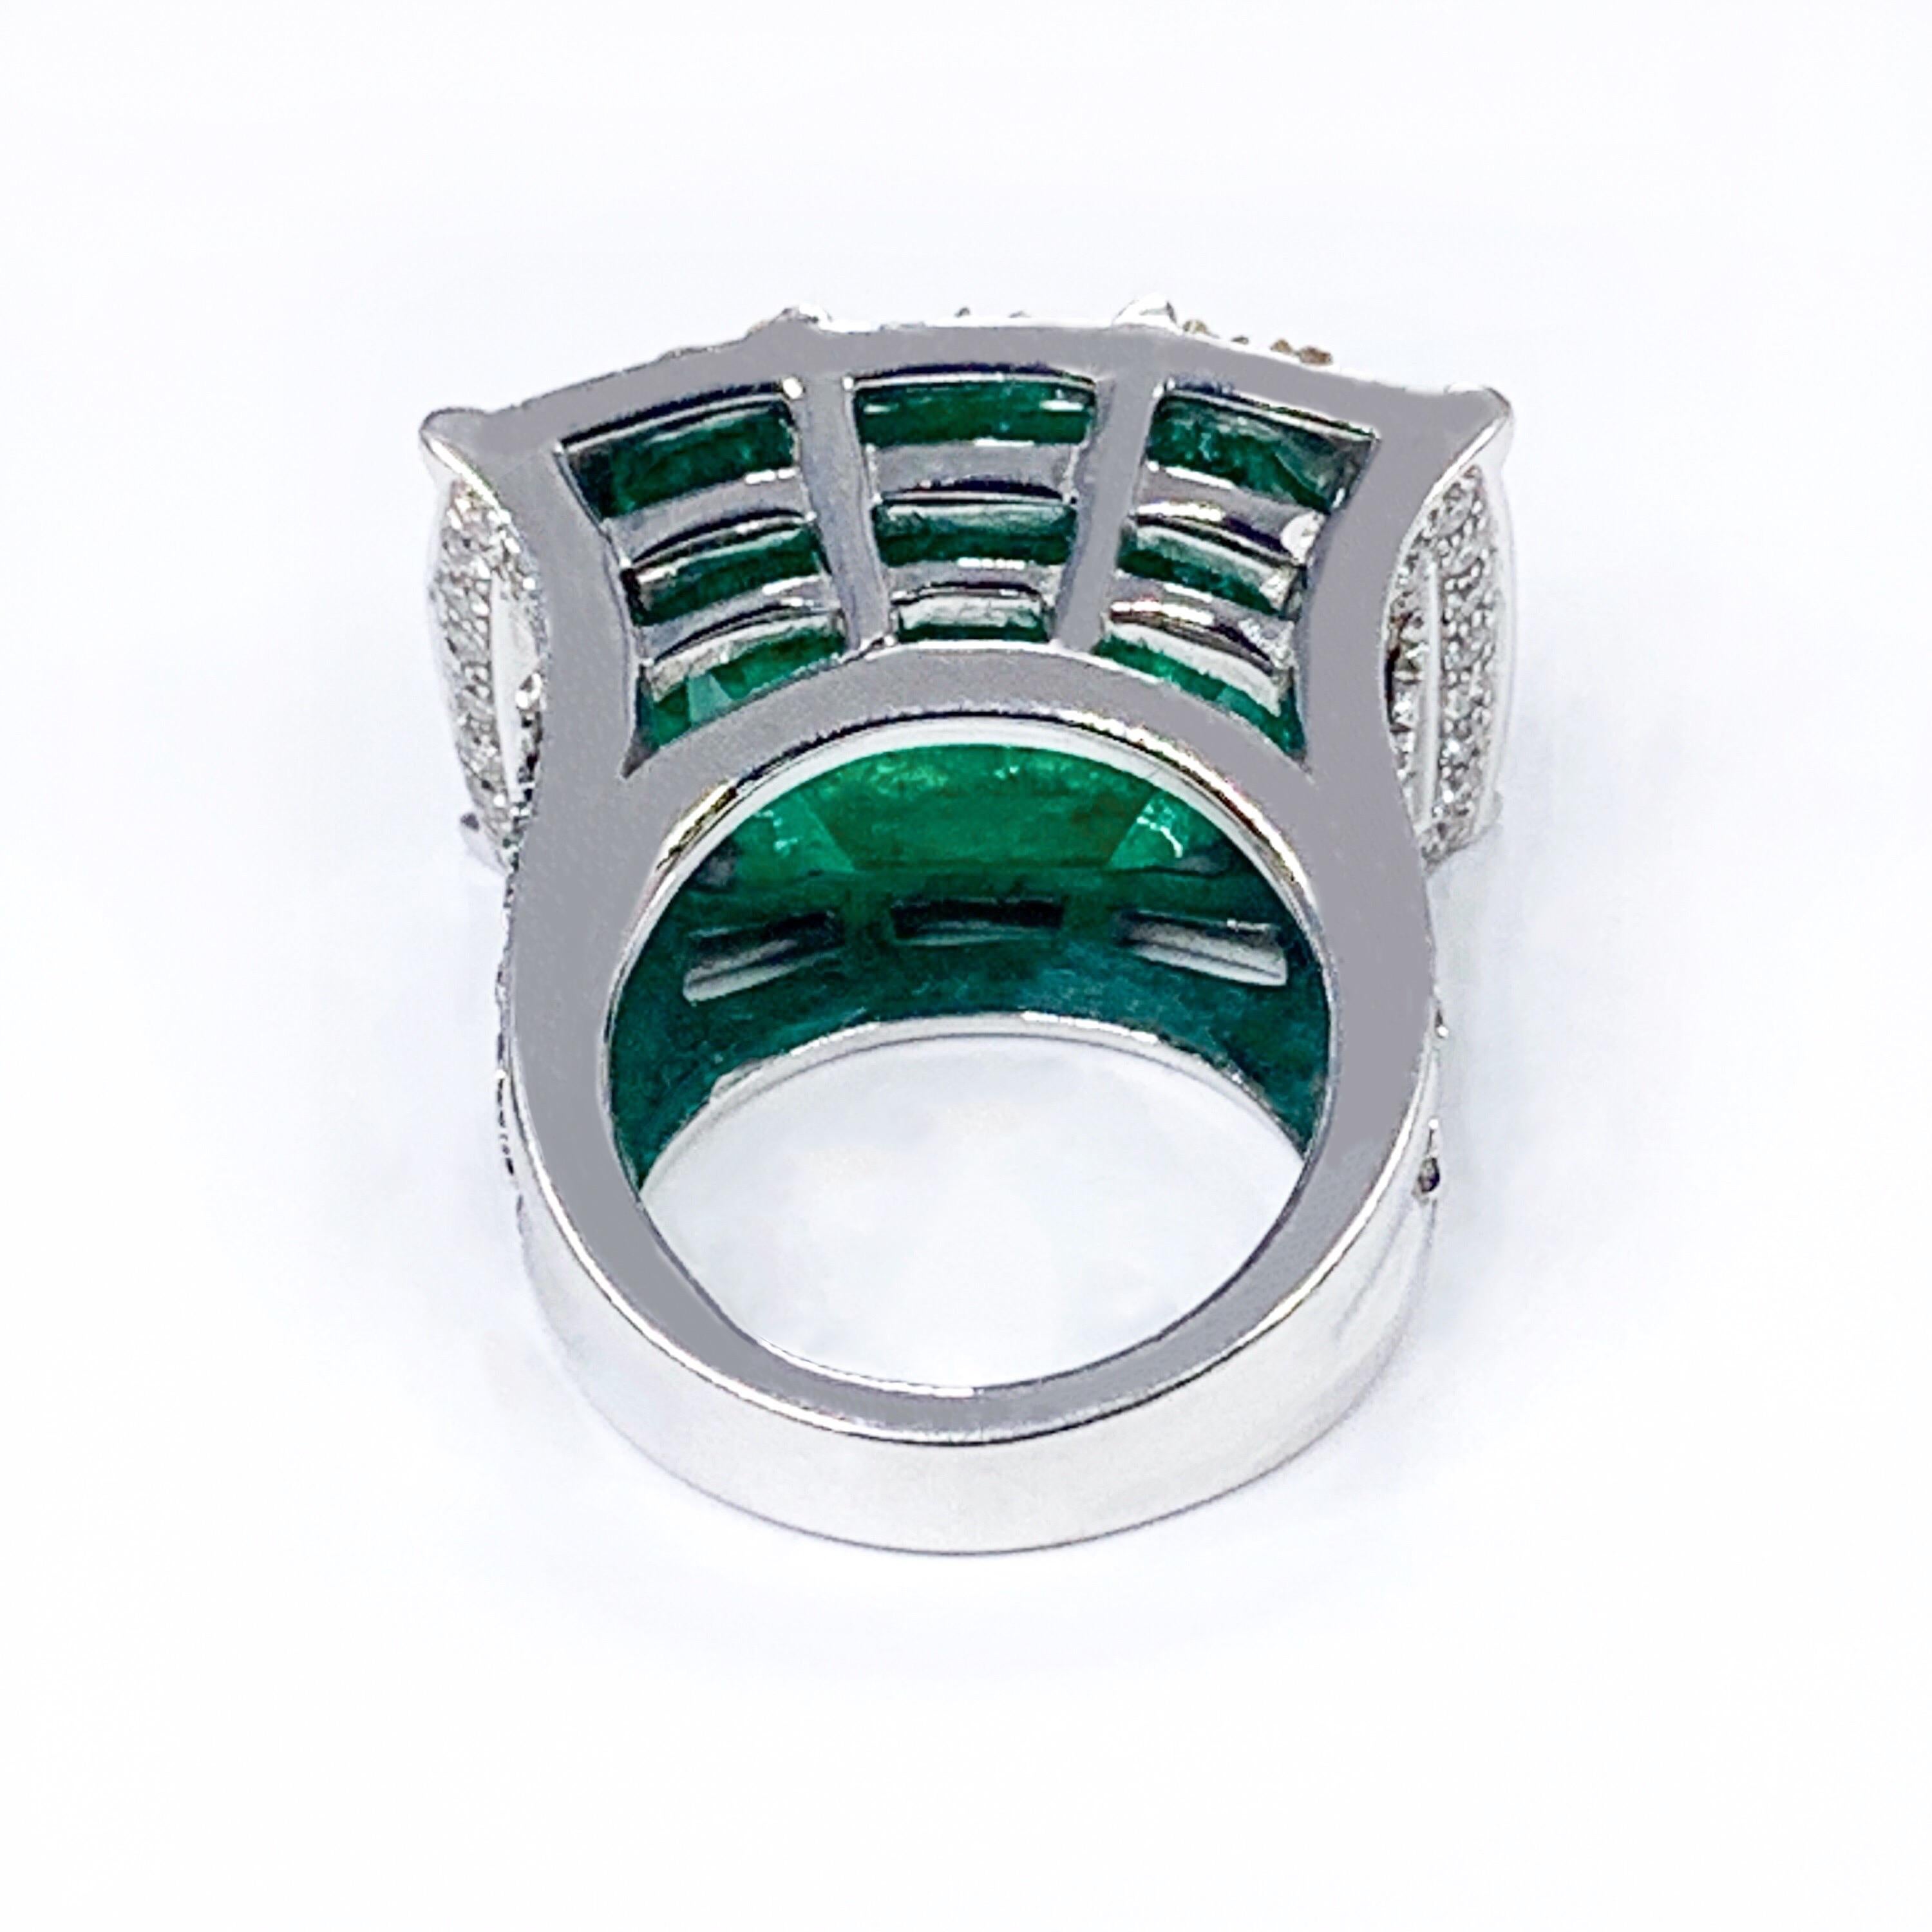 Contemporary Édéenne 17.7 Carat Emerald 18K White Gold Signet Ring with Gold Japan Maple Leaf For Sale